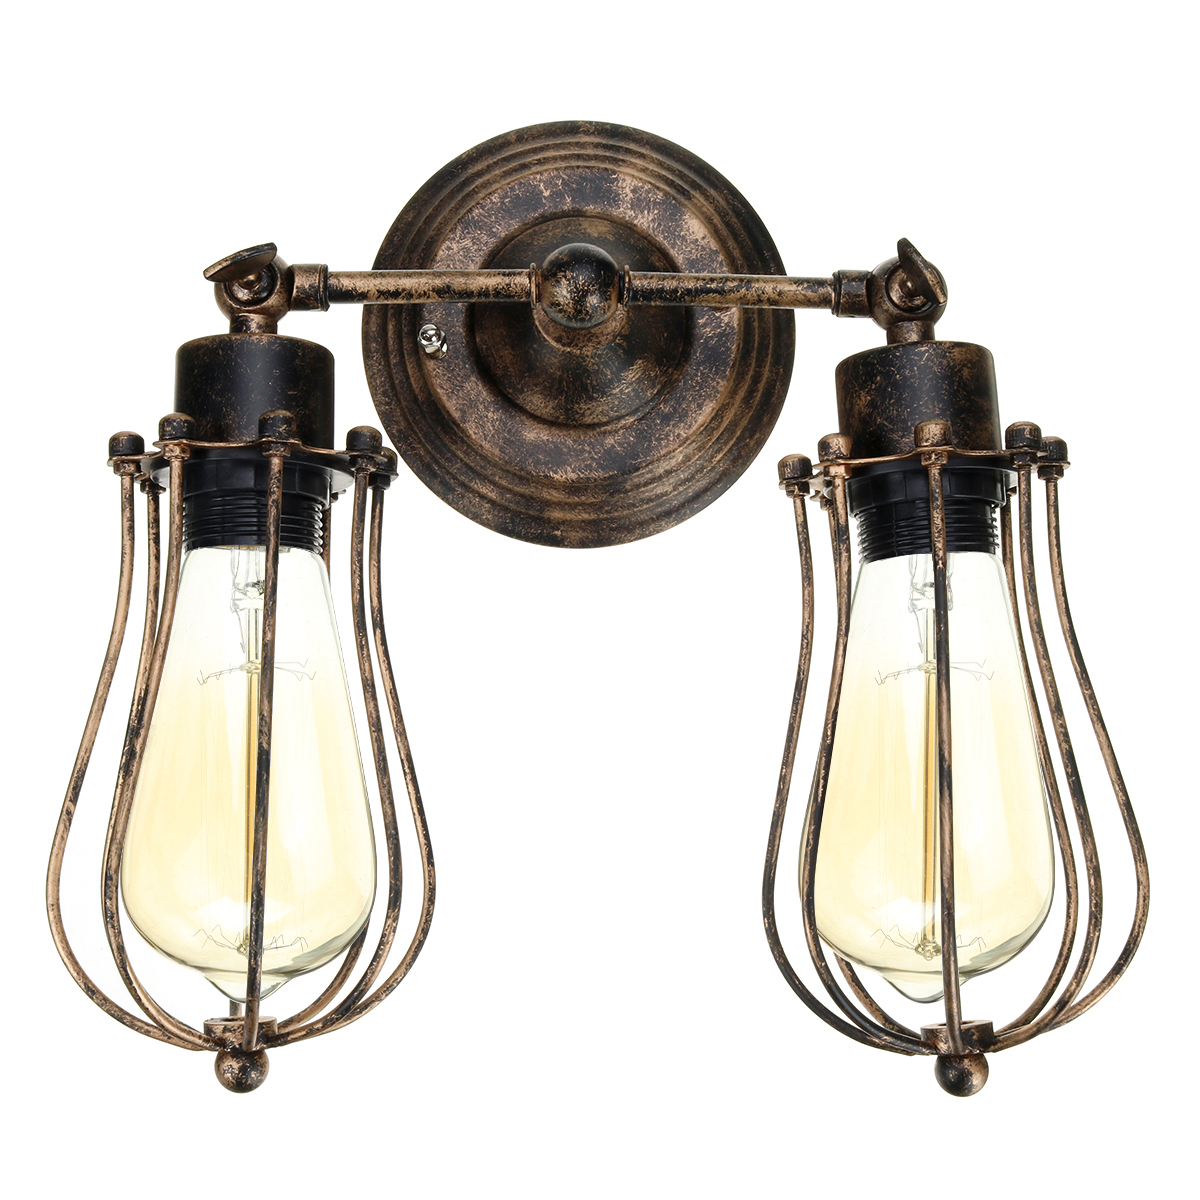 Vintage-Industrial-Wall-mounted-Metal-Cage-Wall-Sconce-Lampshade-Light-Shade-Without-Bulb-1721820-4